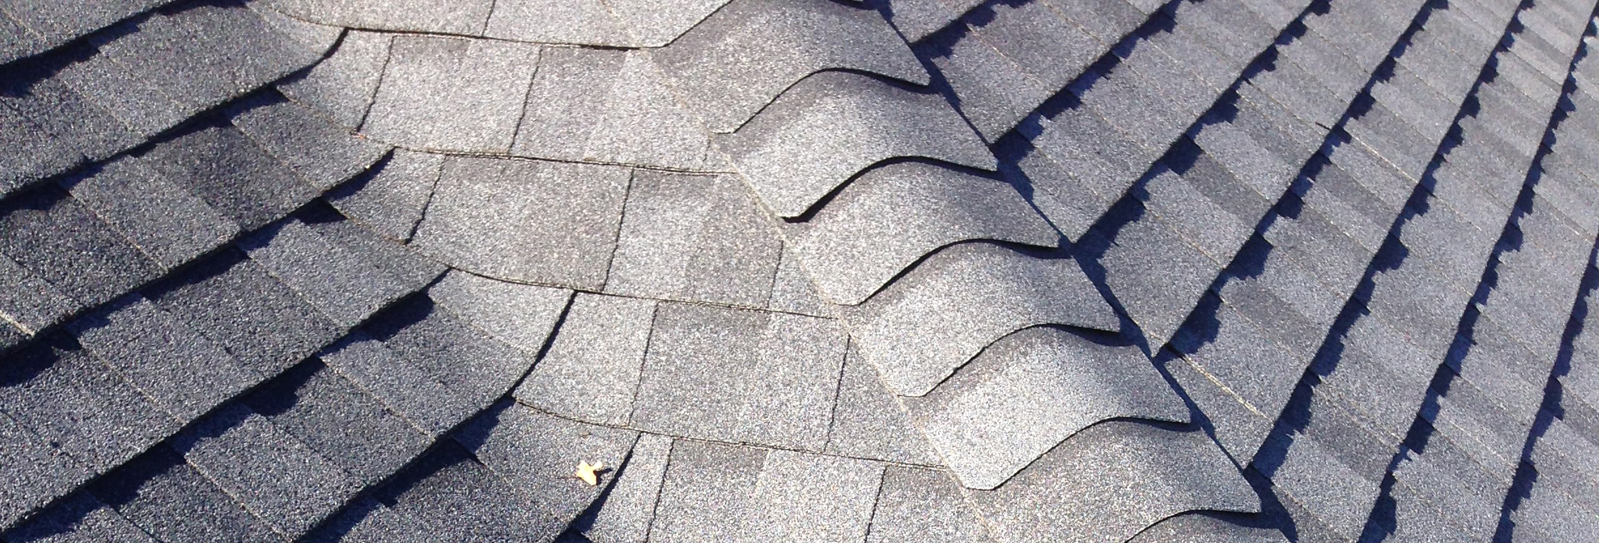 A close up view of a gray shingled roof in Alexandria VA.